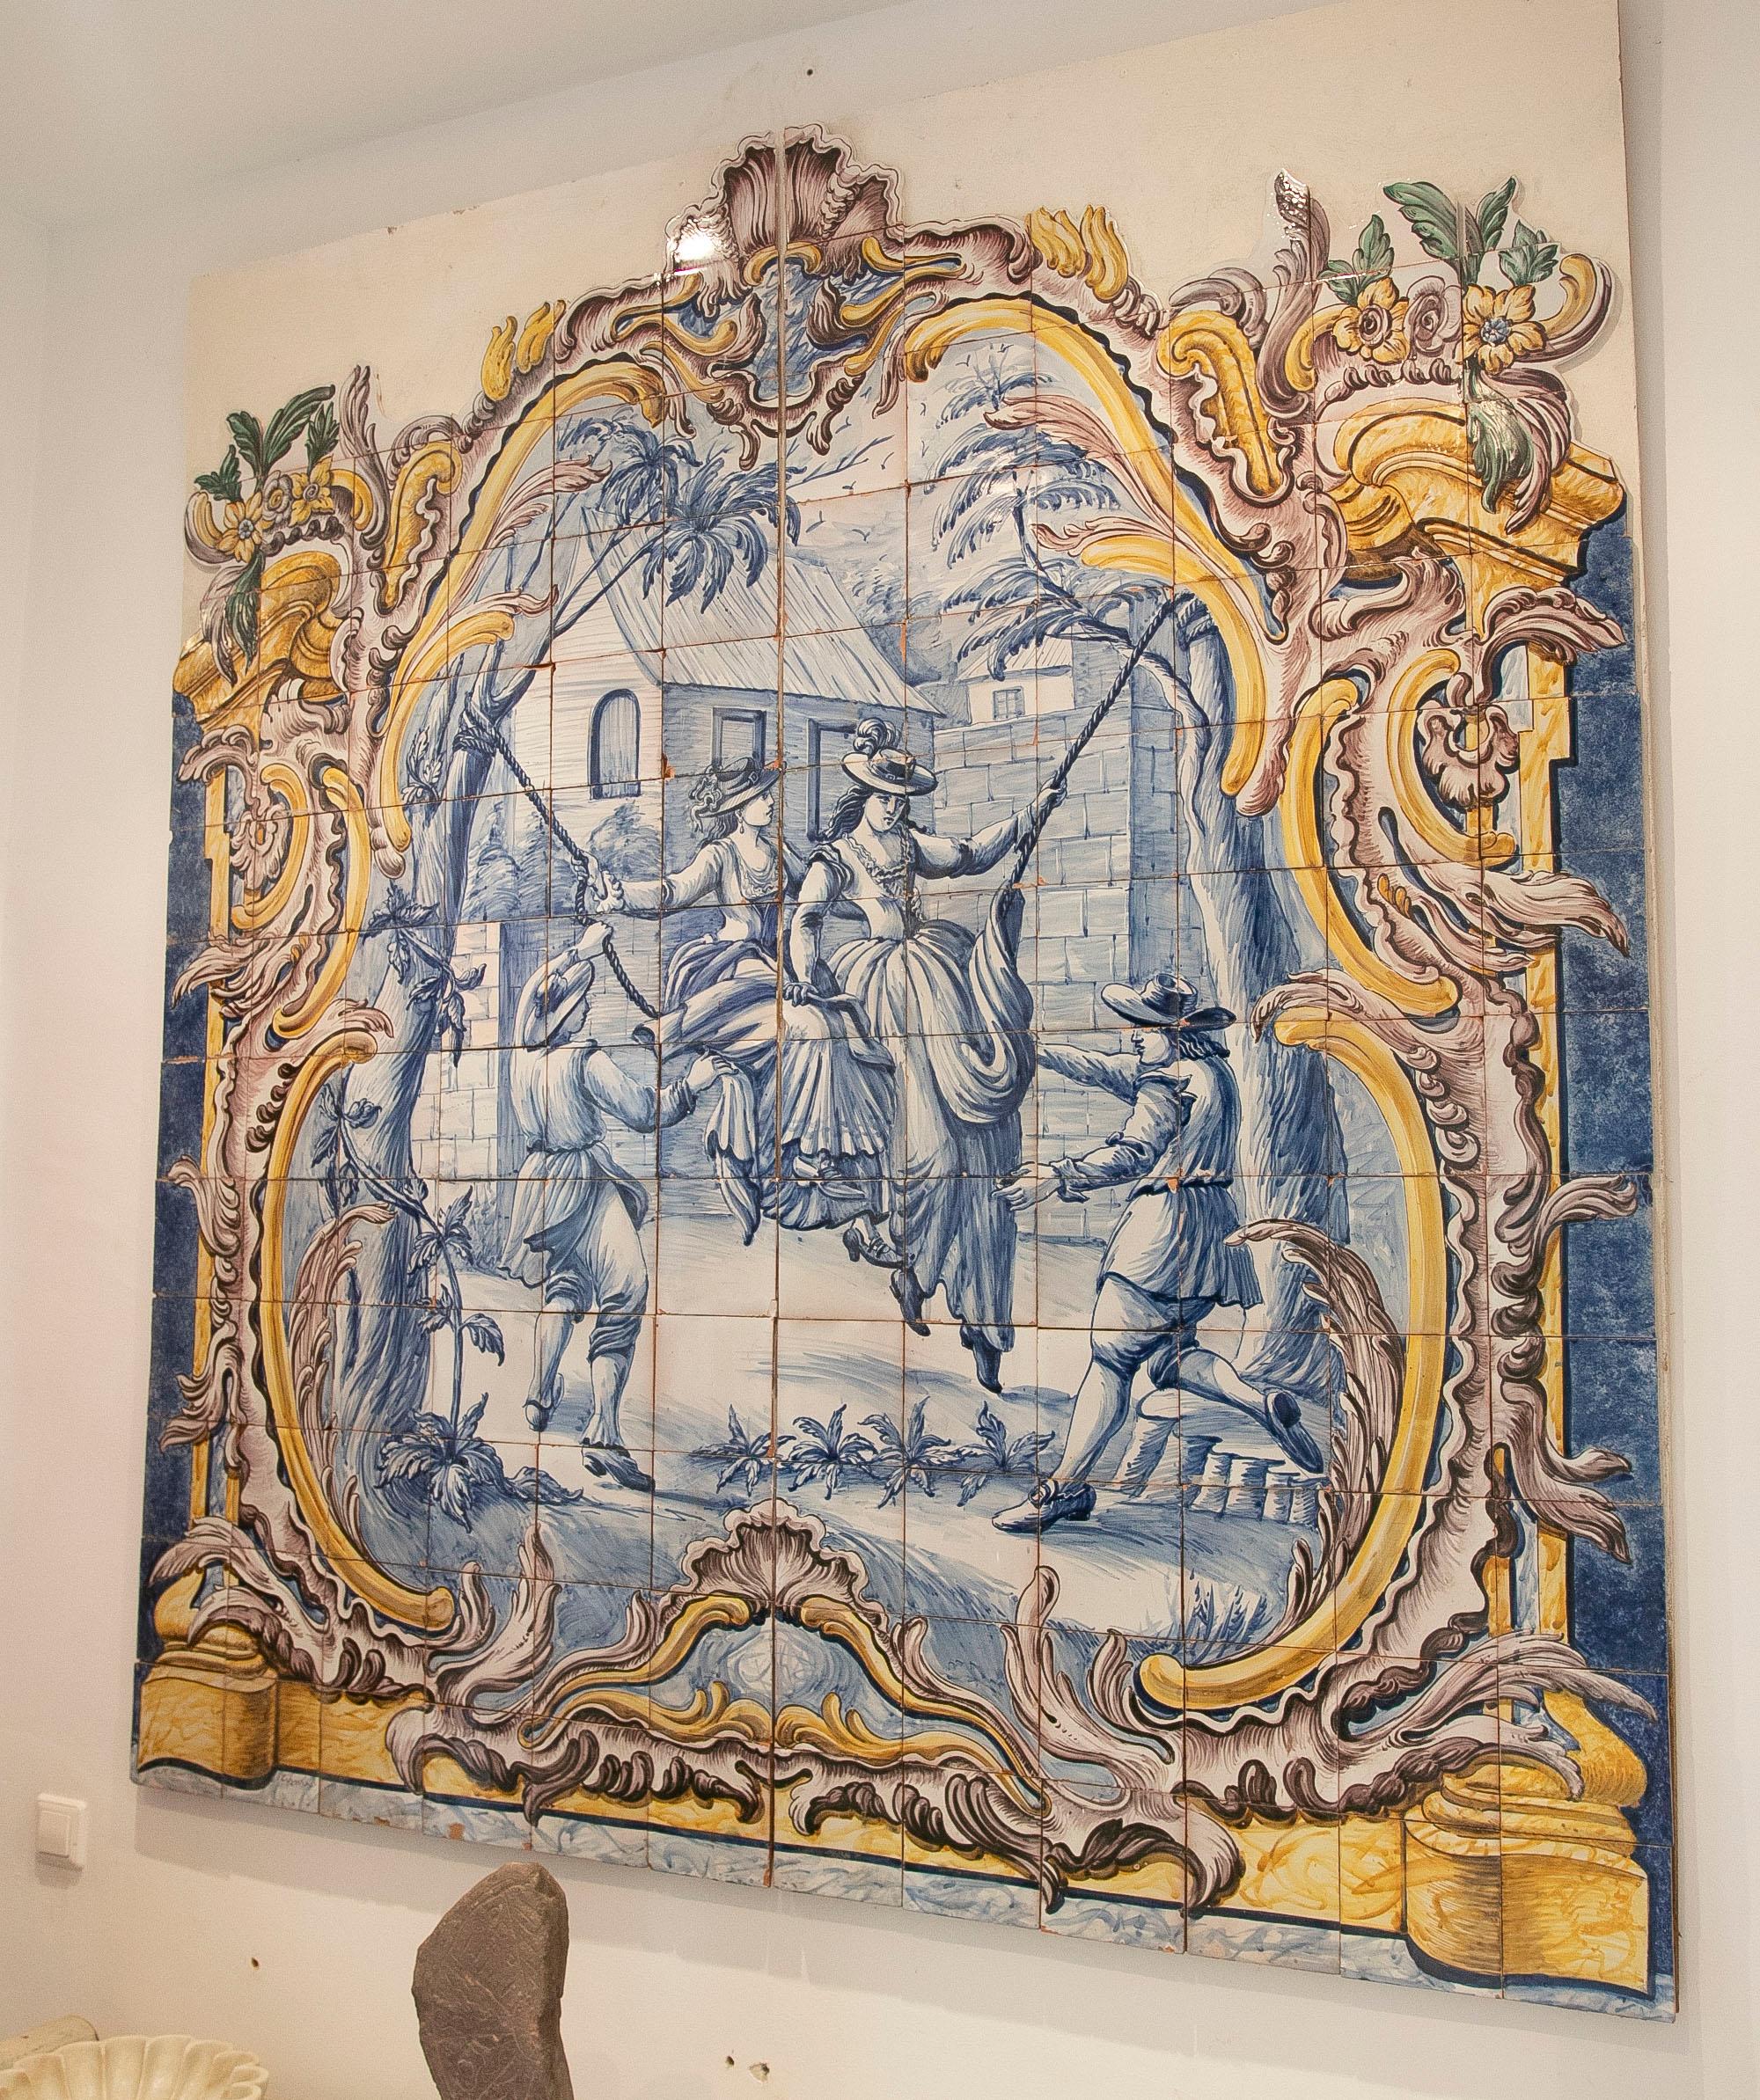 Portuguese decorative tile with a costumbrista scene of women playing on a swing with men. Scene from the 19th century